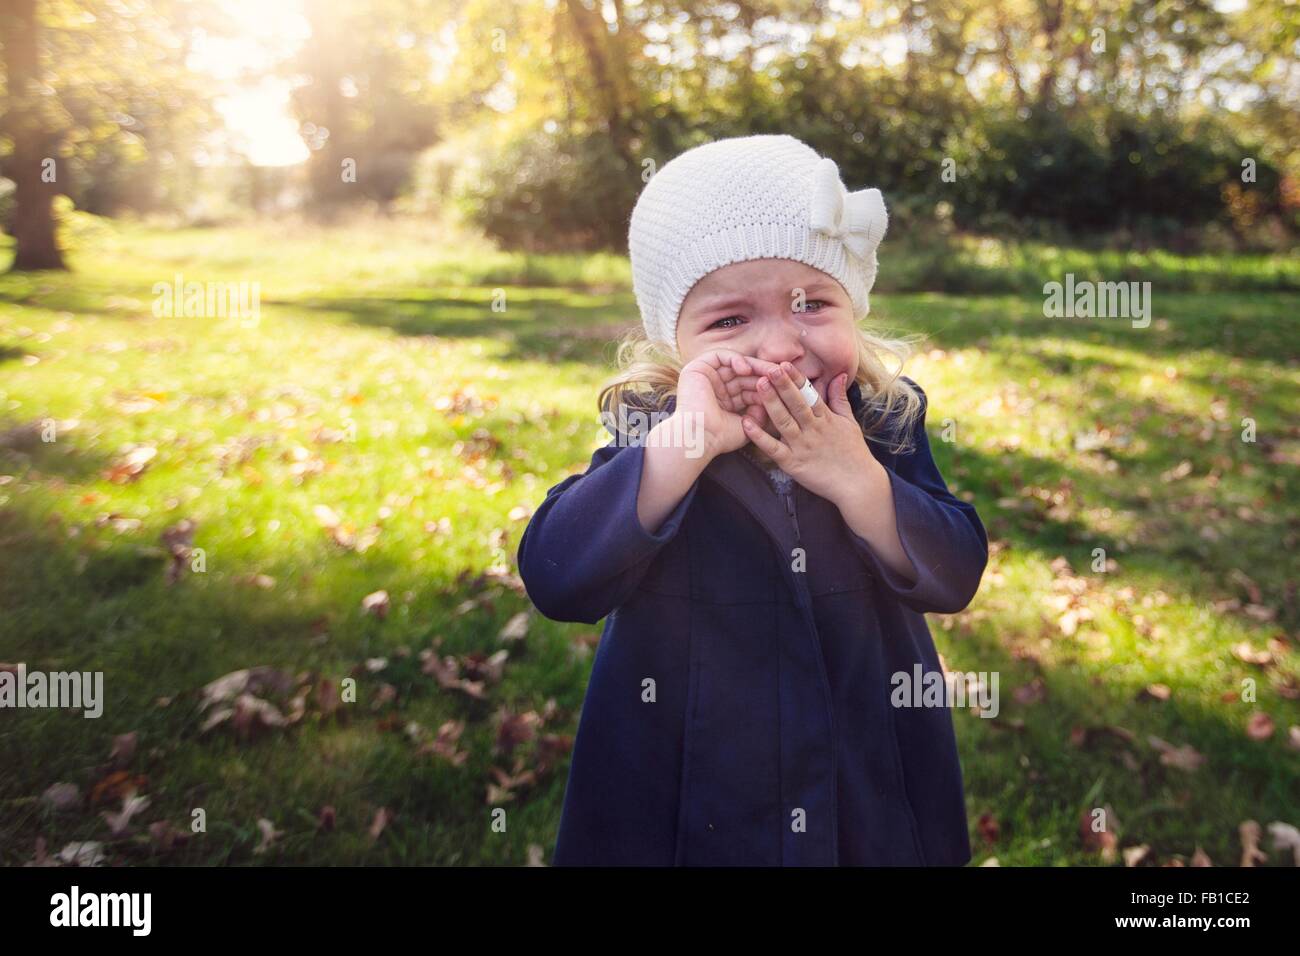 Girl wearing knit hat with adhesive plaster on finger hand to mouth crying Stock Photo